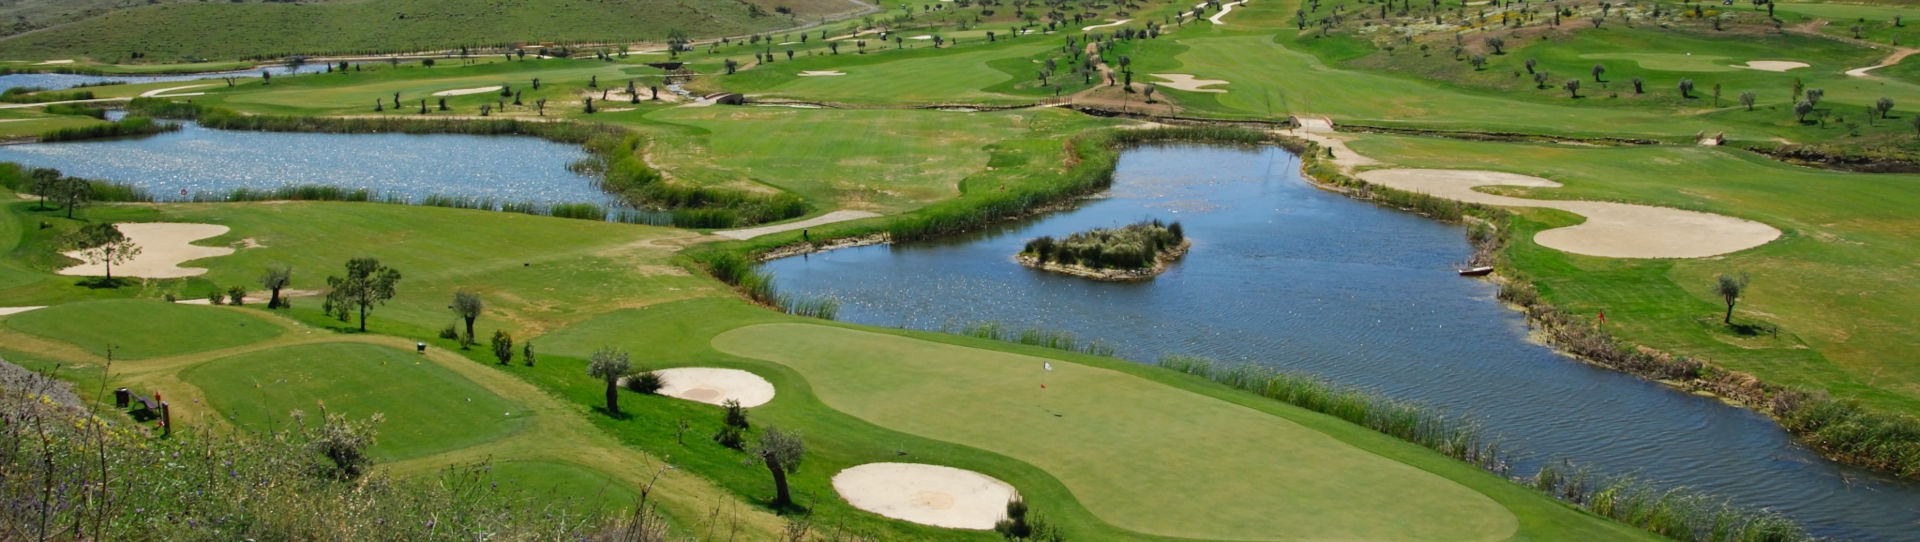 Portugal golf holidays - Quinta do Vale & Valle Guadiana - Photo 1